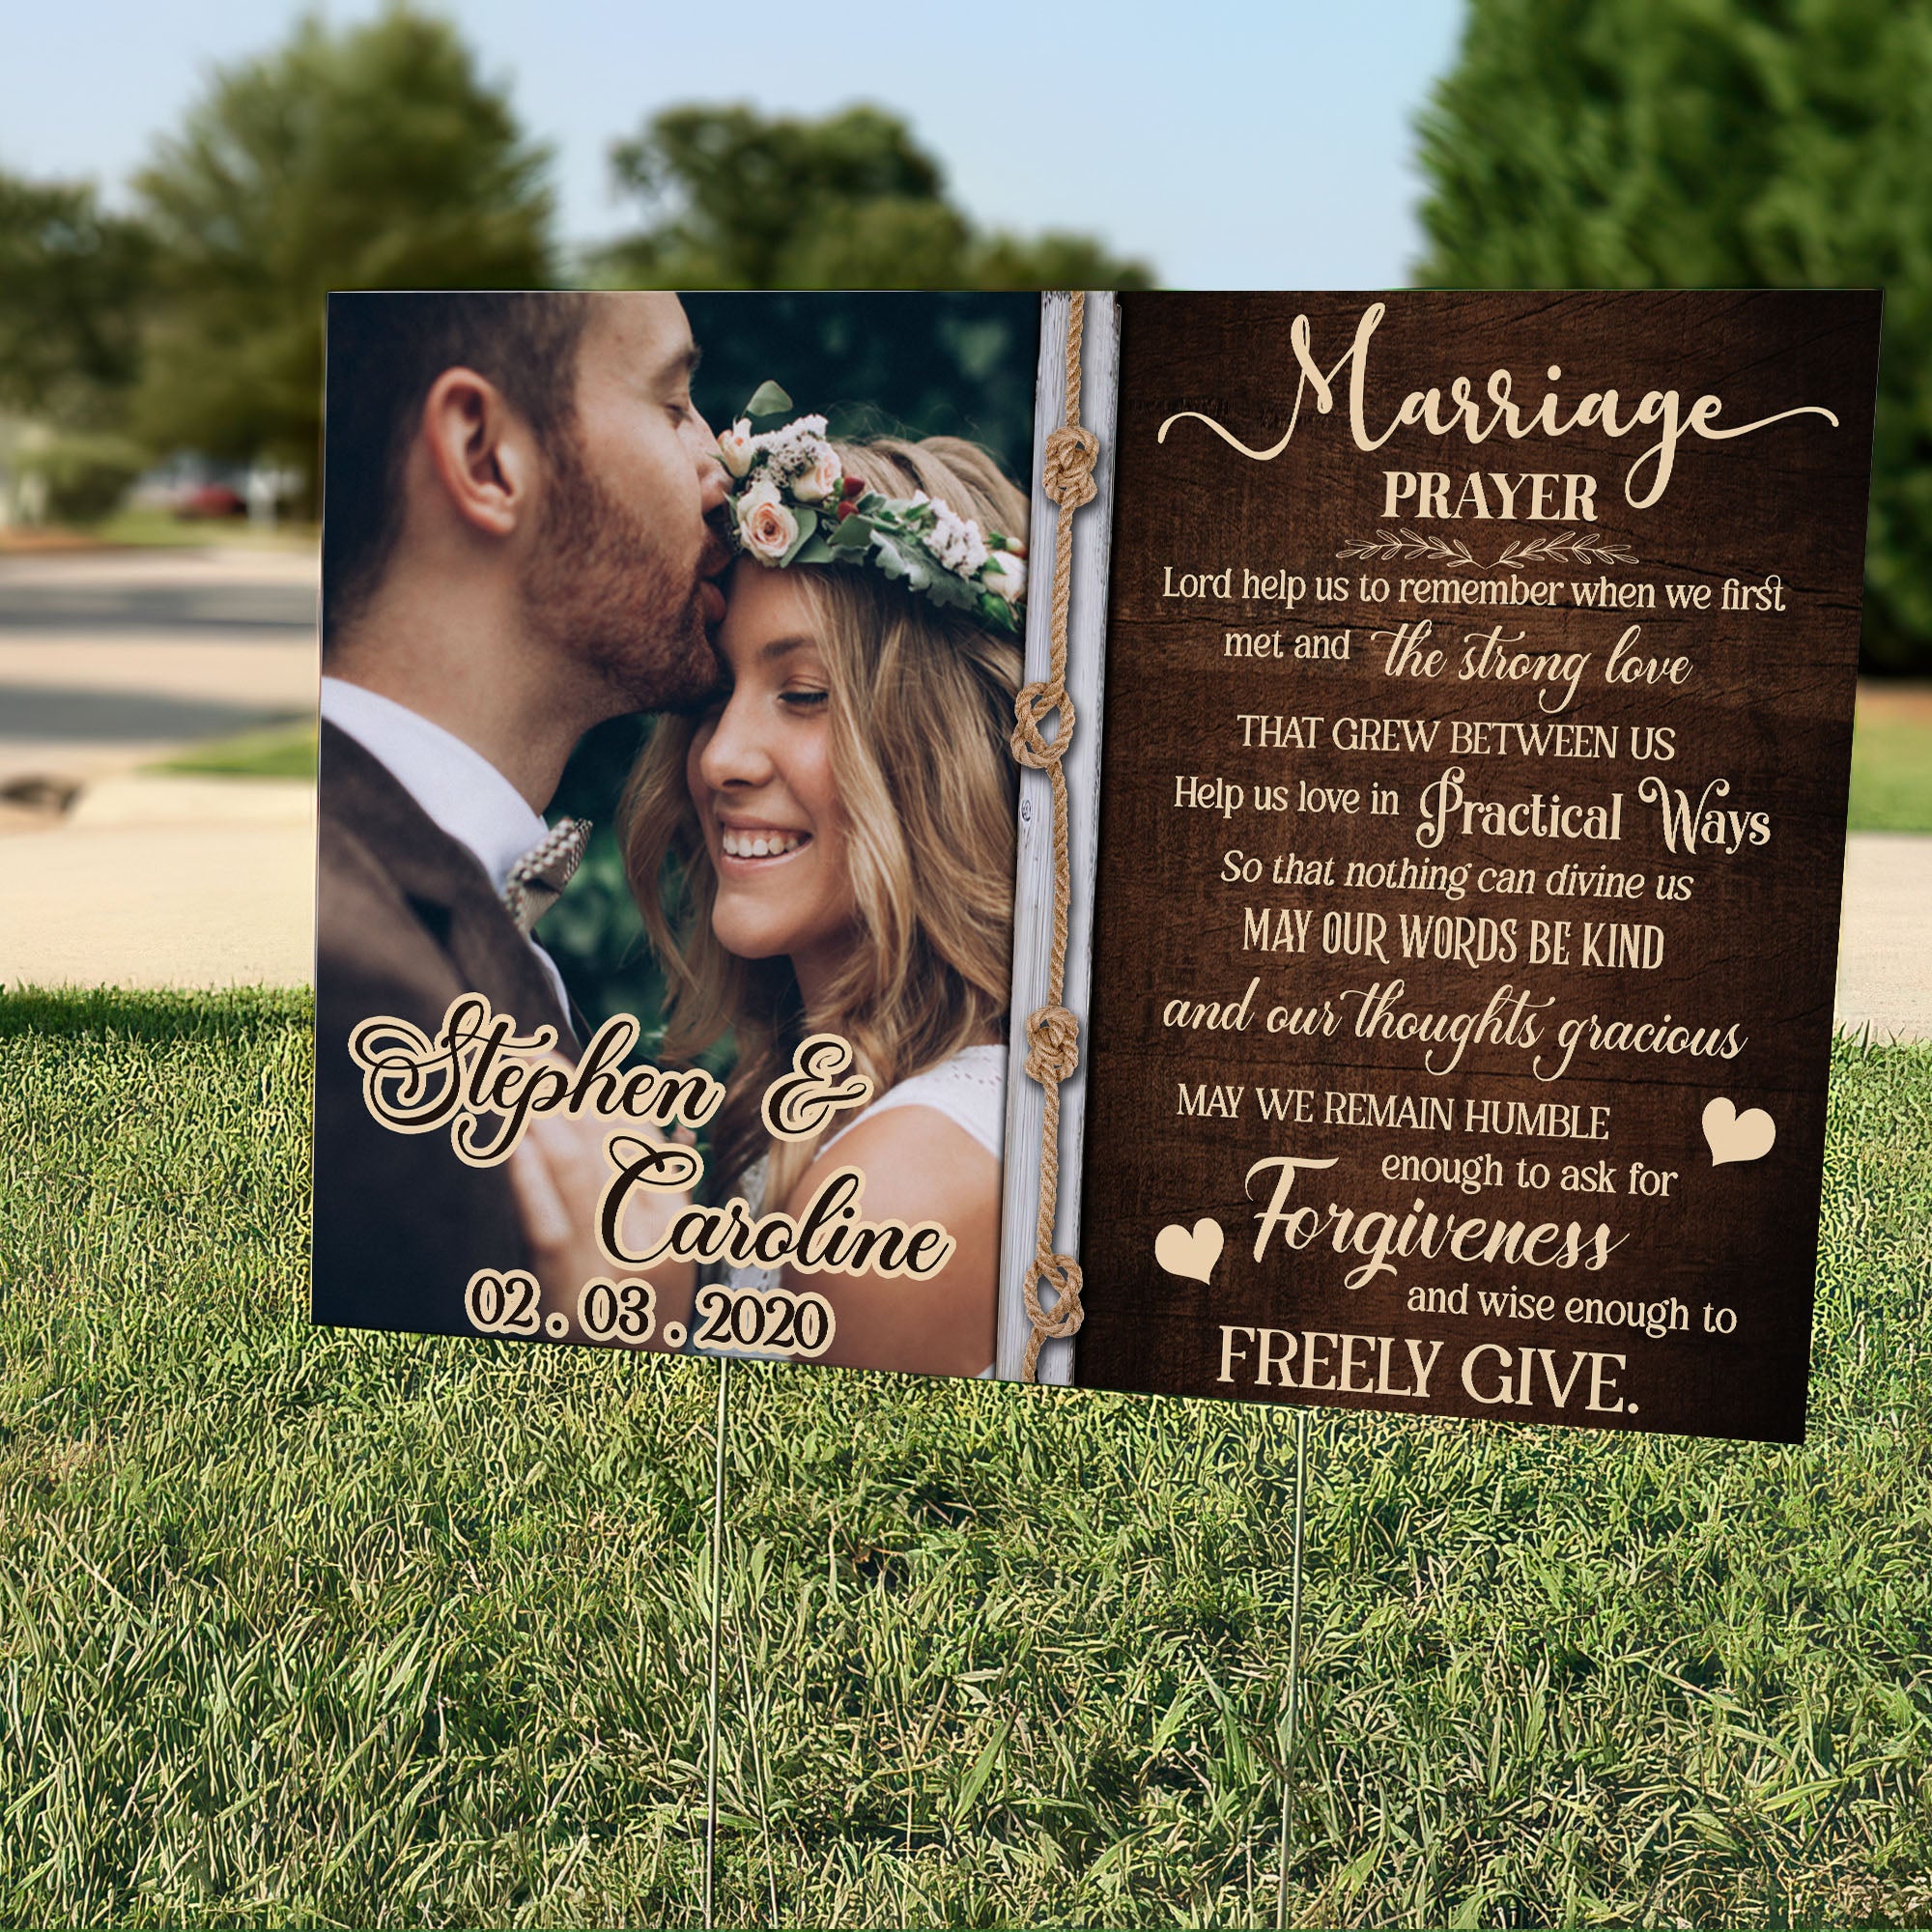 Personalized Wedding Prayer Lawn Sign, Marriage Player, Gift For Wedding Day